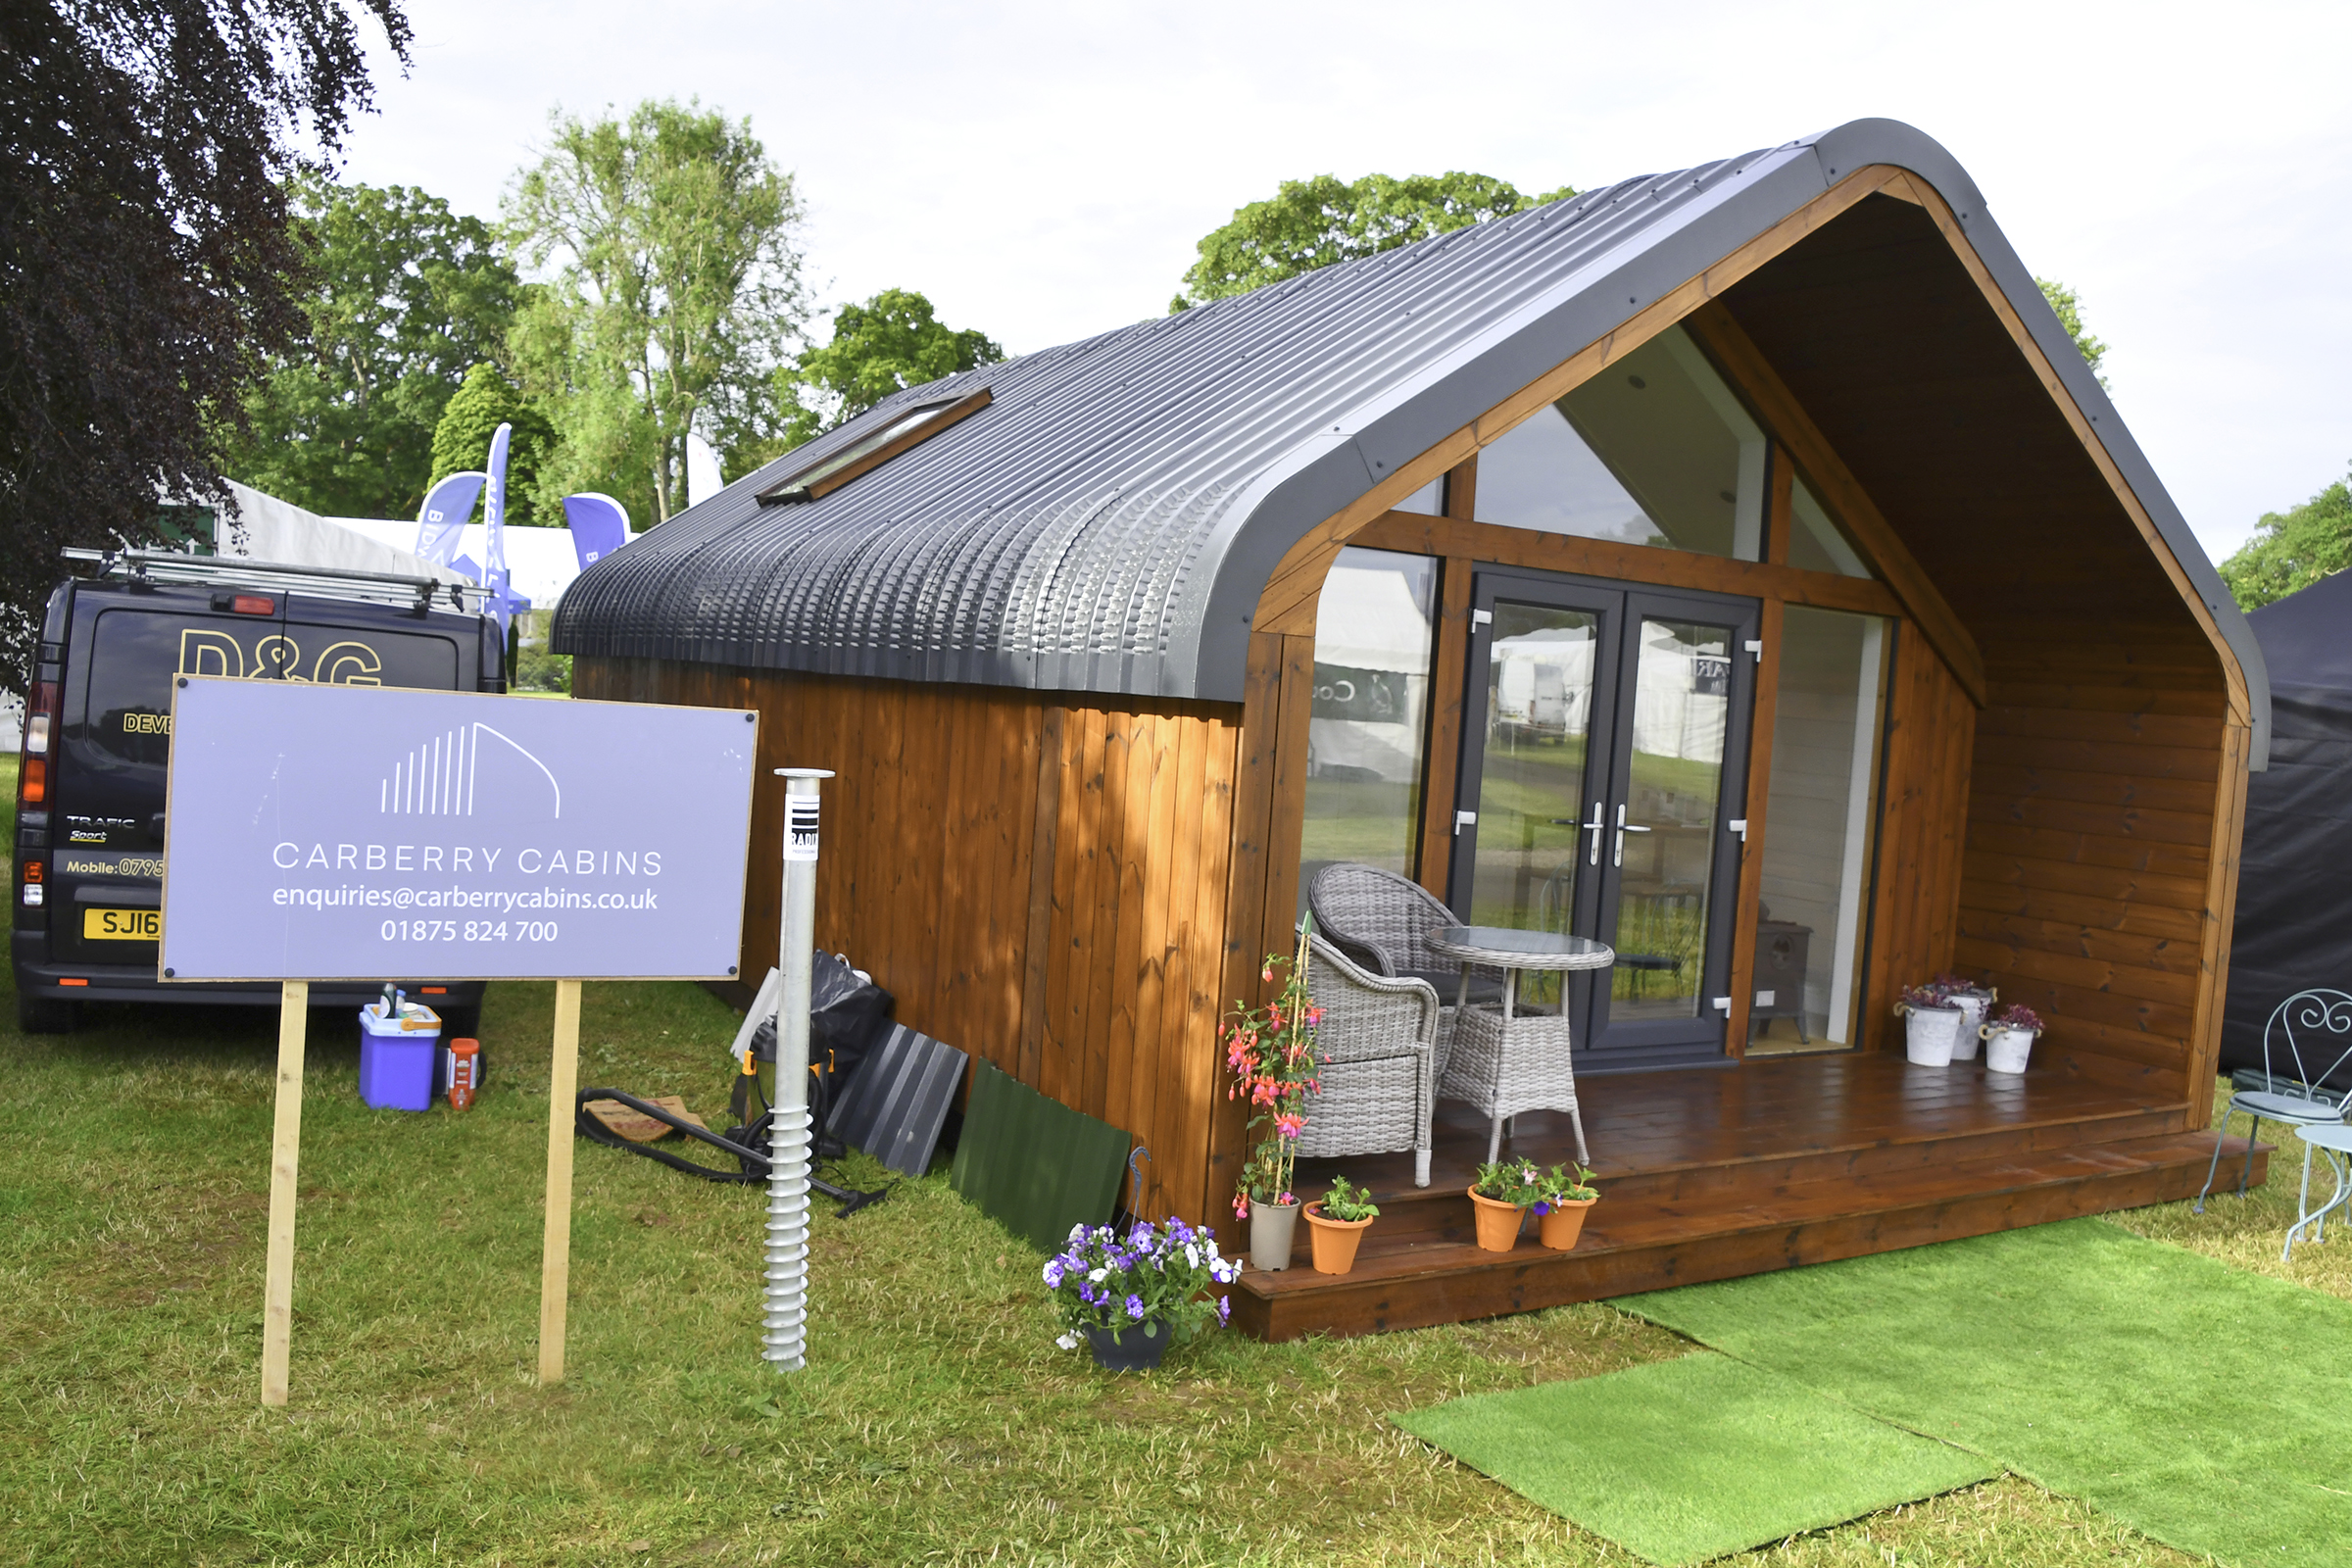 carberry cabins display at scottish game fair 2022